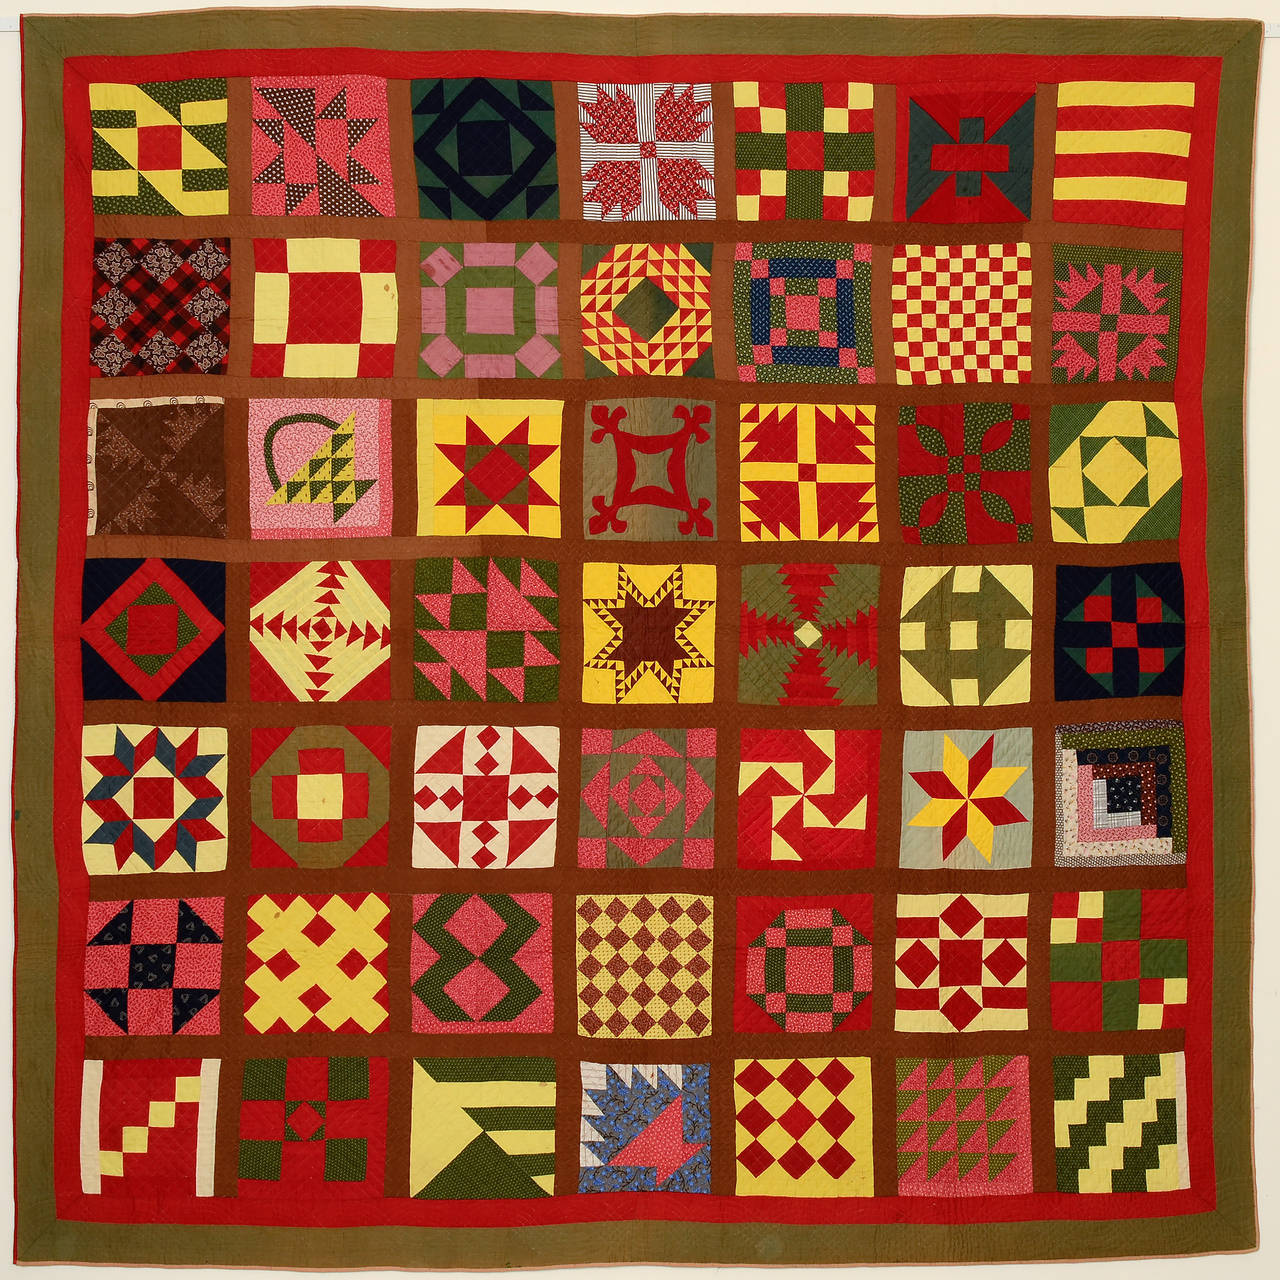 This bold sampler quilt is one of Lebanon County's best. The solid colors are typical of its Old Order Mennonite origin. There is slight fading but they are still very bold and vibrant. The patterns are a combination of traditional and original